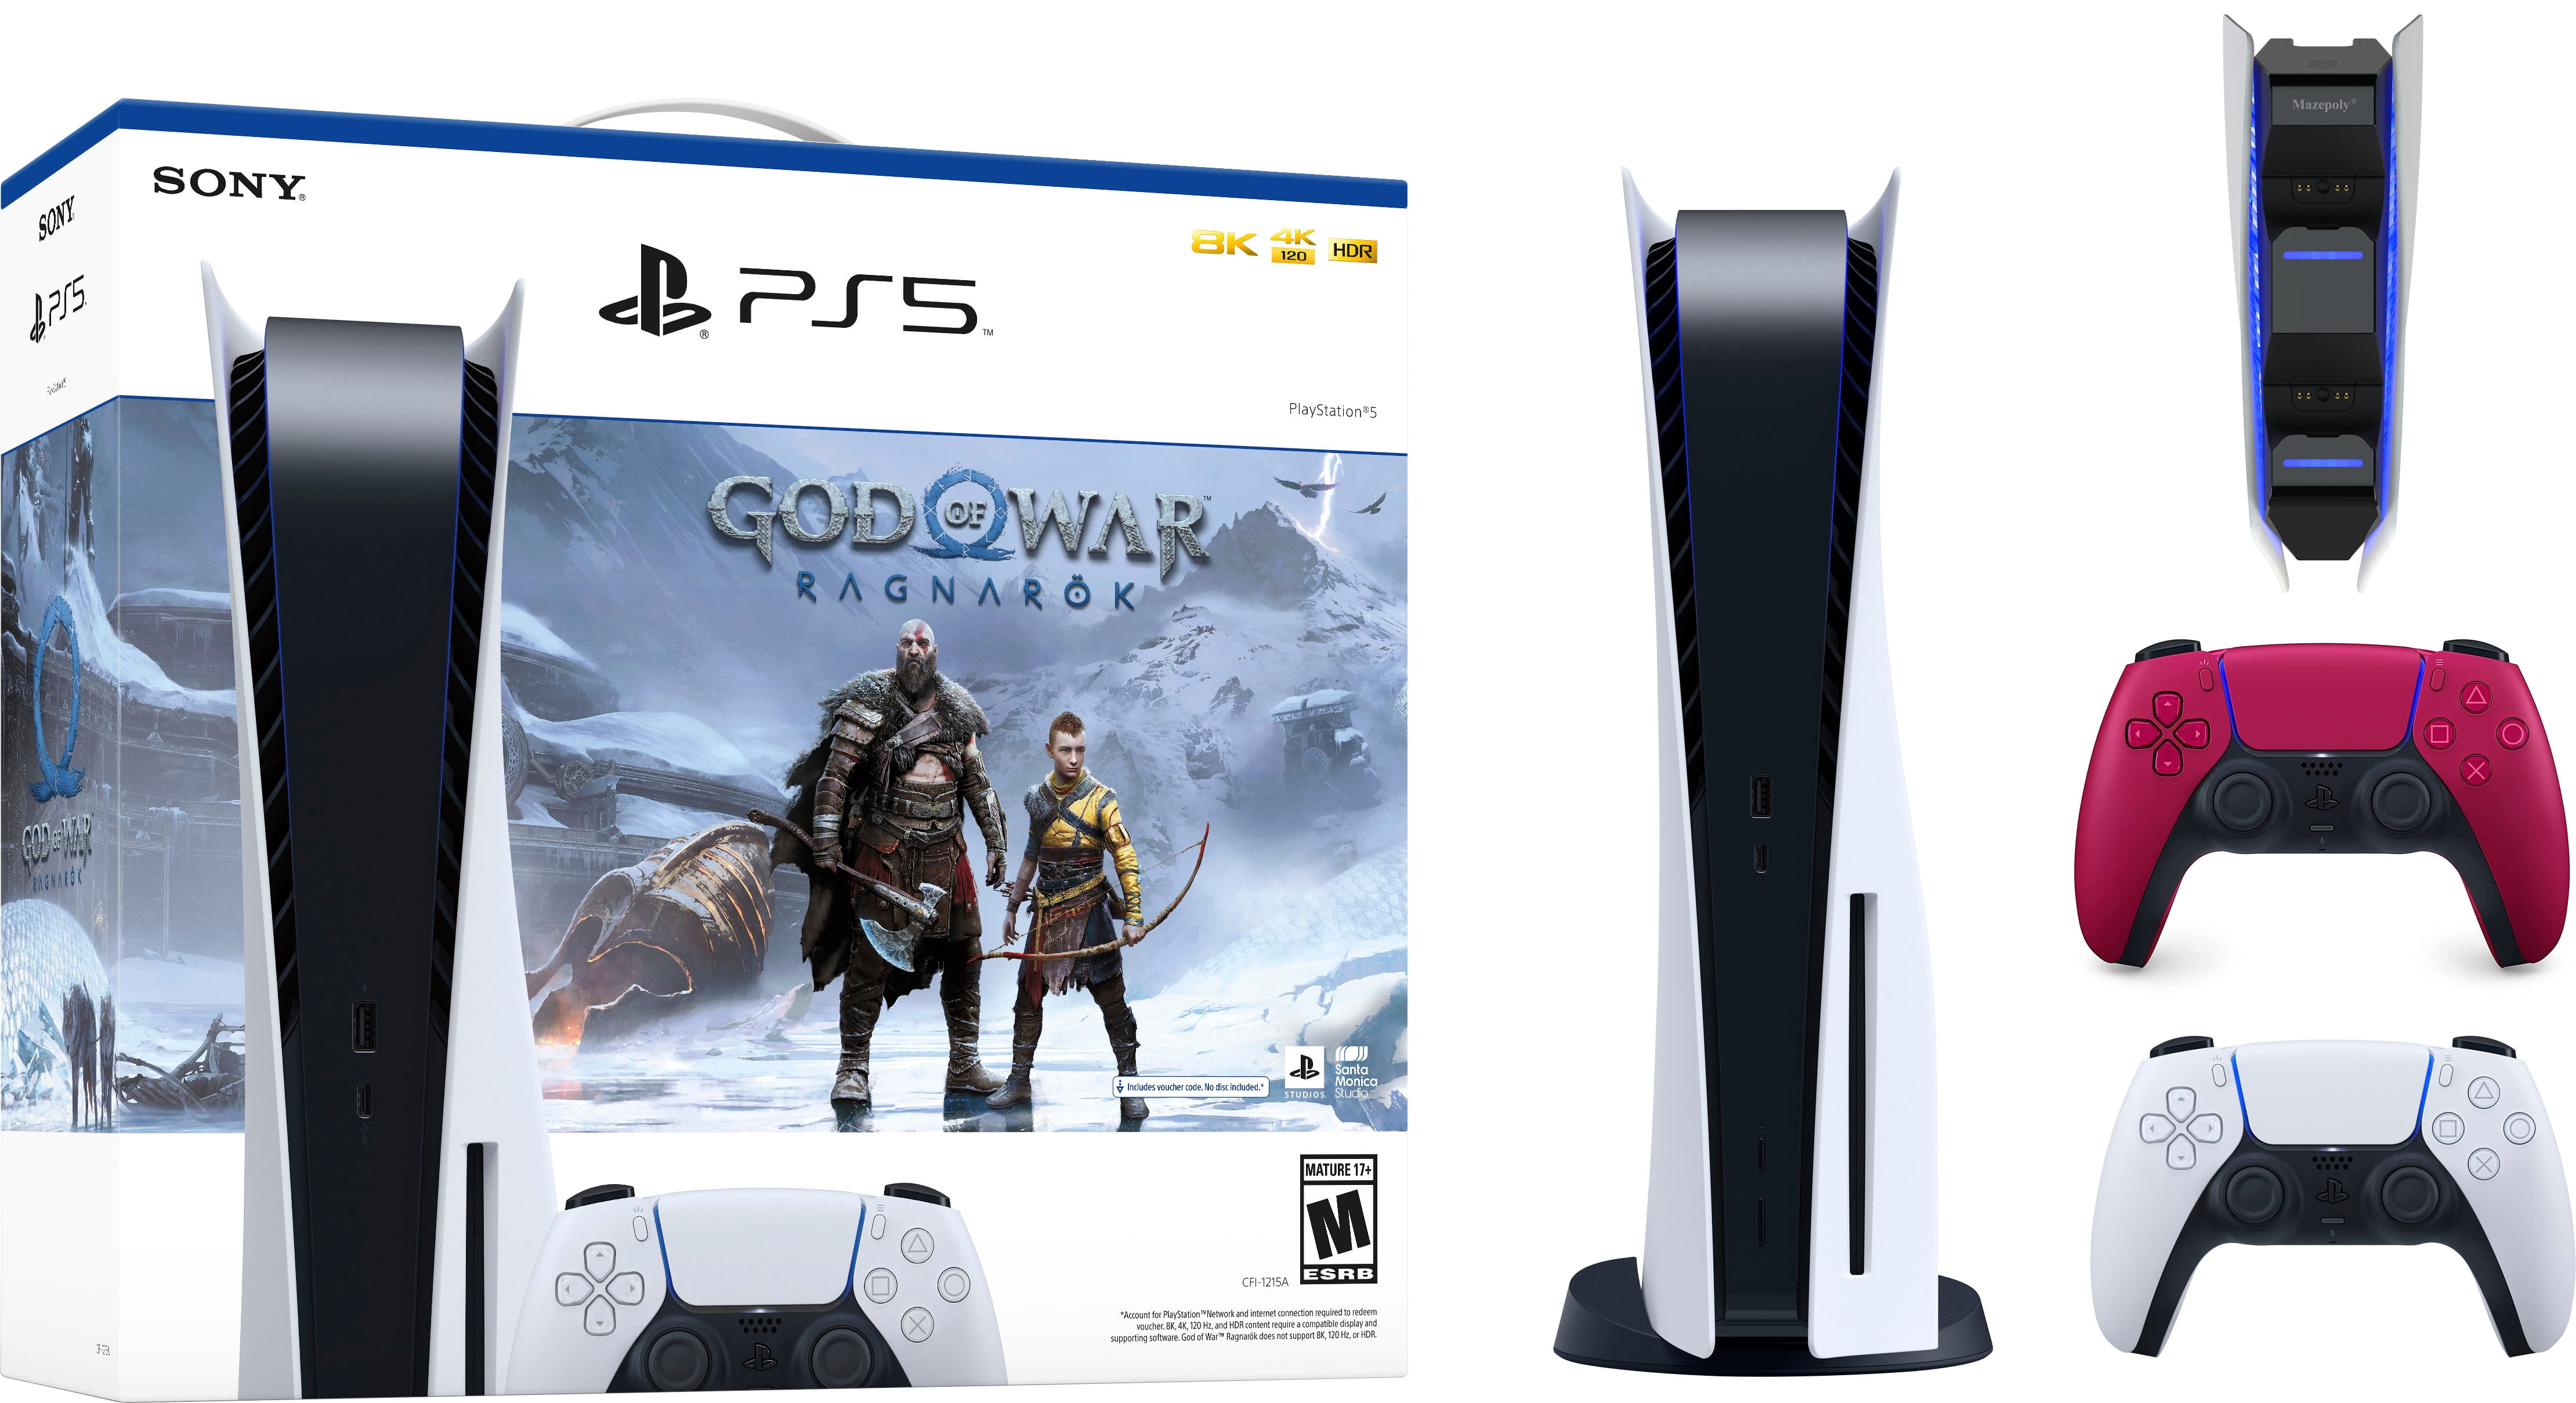 Play-Station-5 Disc Edition God War Ragnarok Bundle with Extra Red Wireless Controller + Mazepoly Accessories - Walmart.com